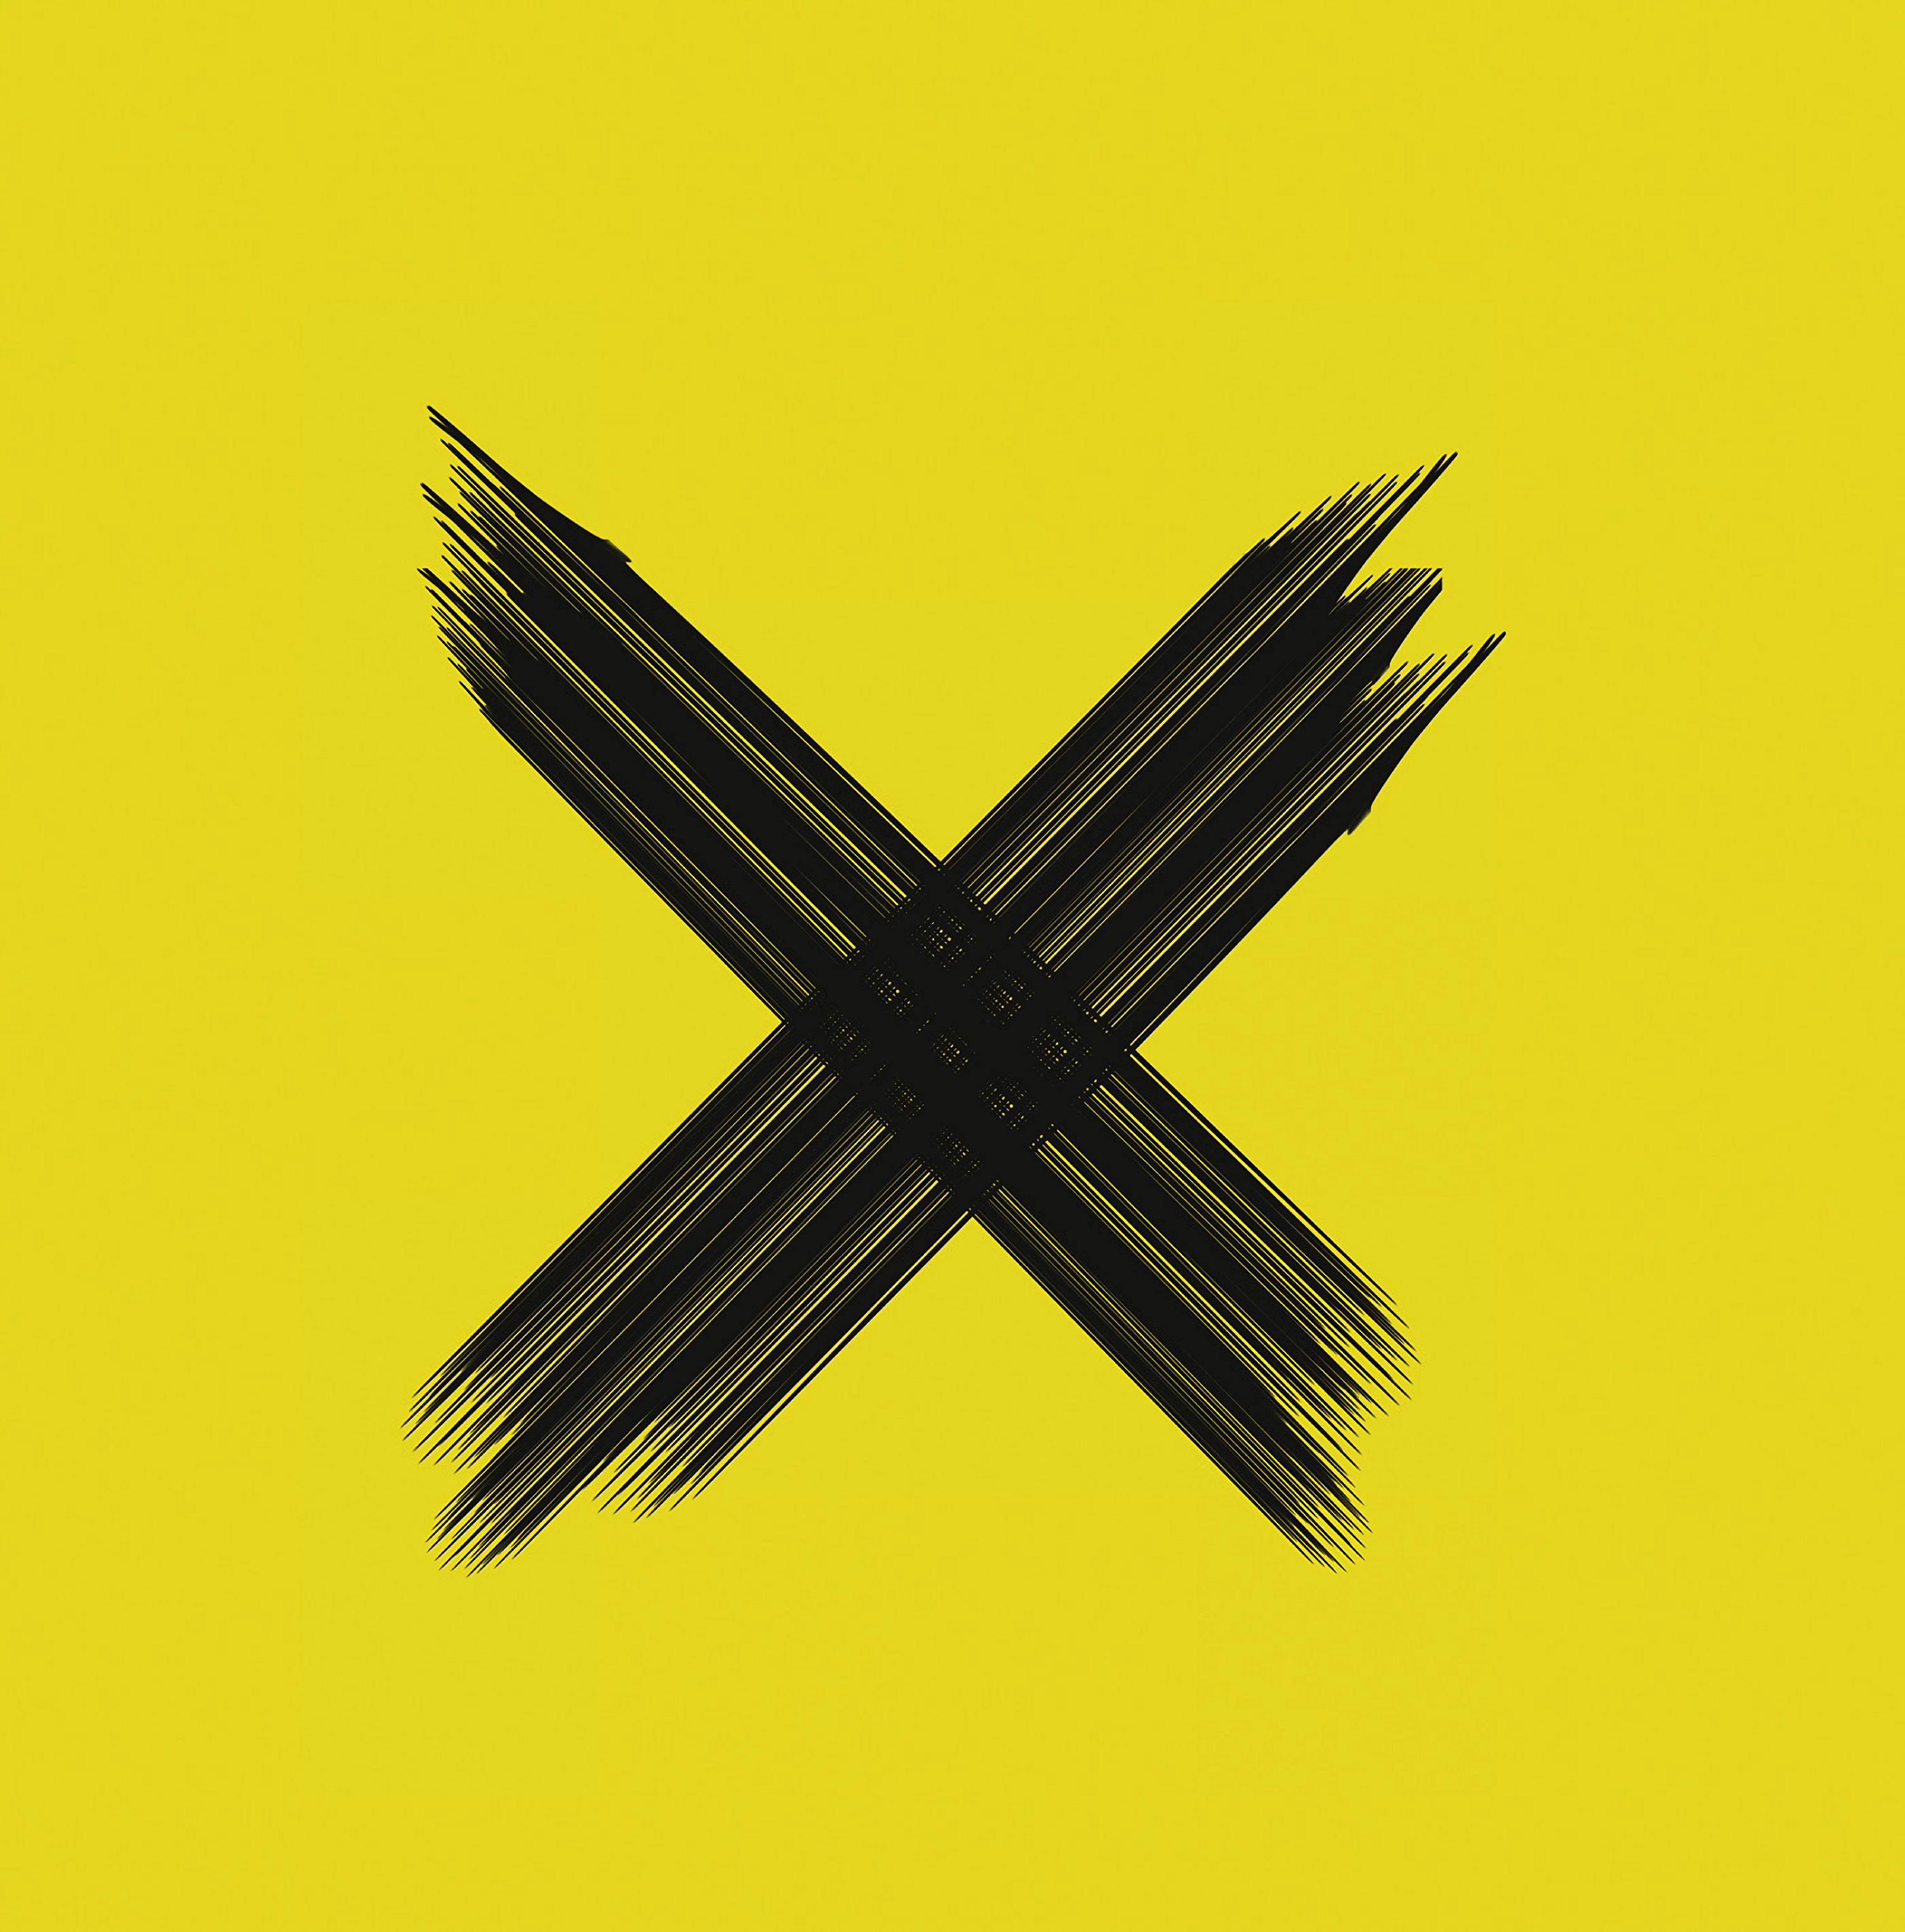 135955 free wallpaper 720x1280 for phone, download images intersection, yellow, minimalism, symbol 720x1280 for mobile